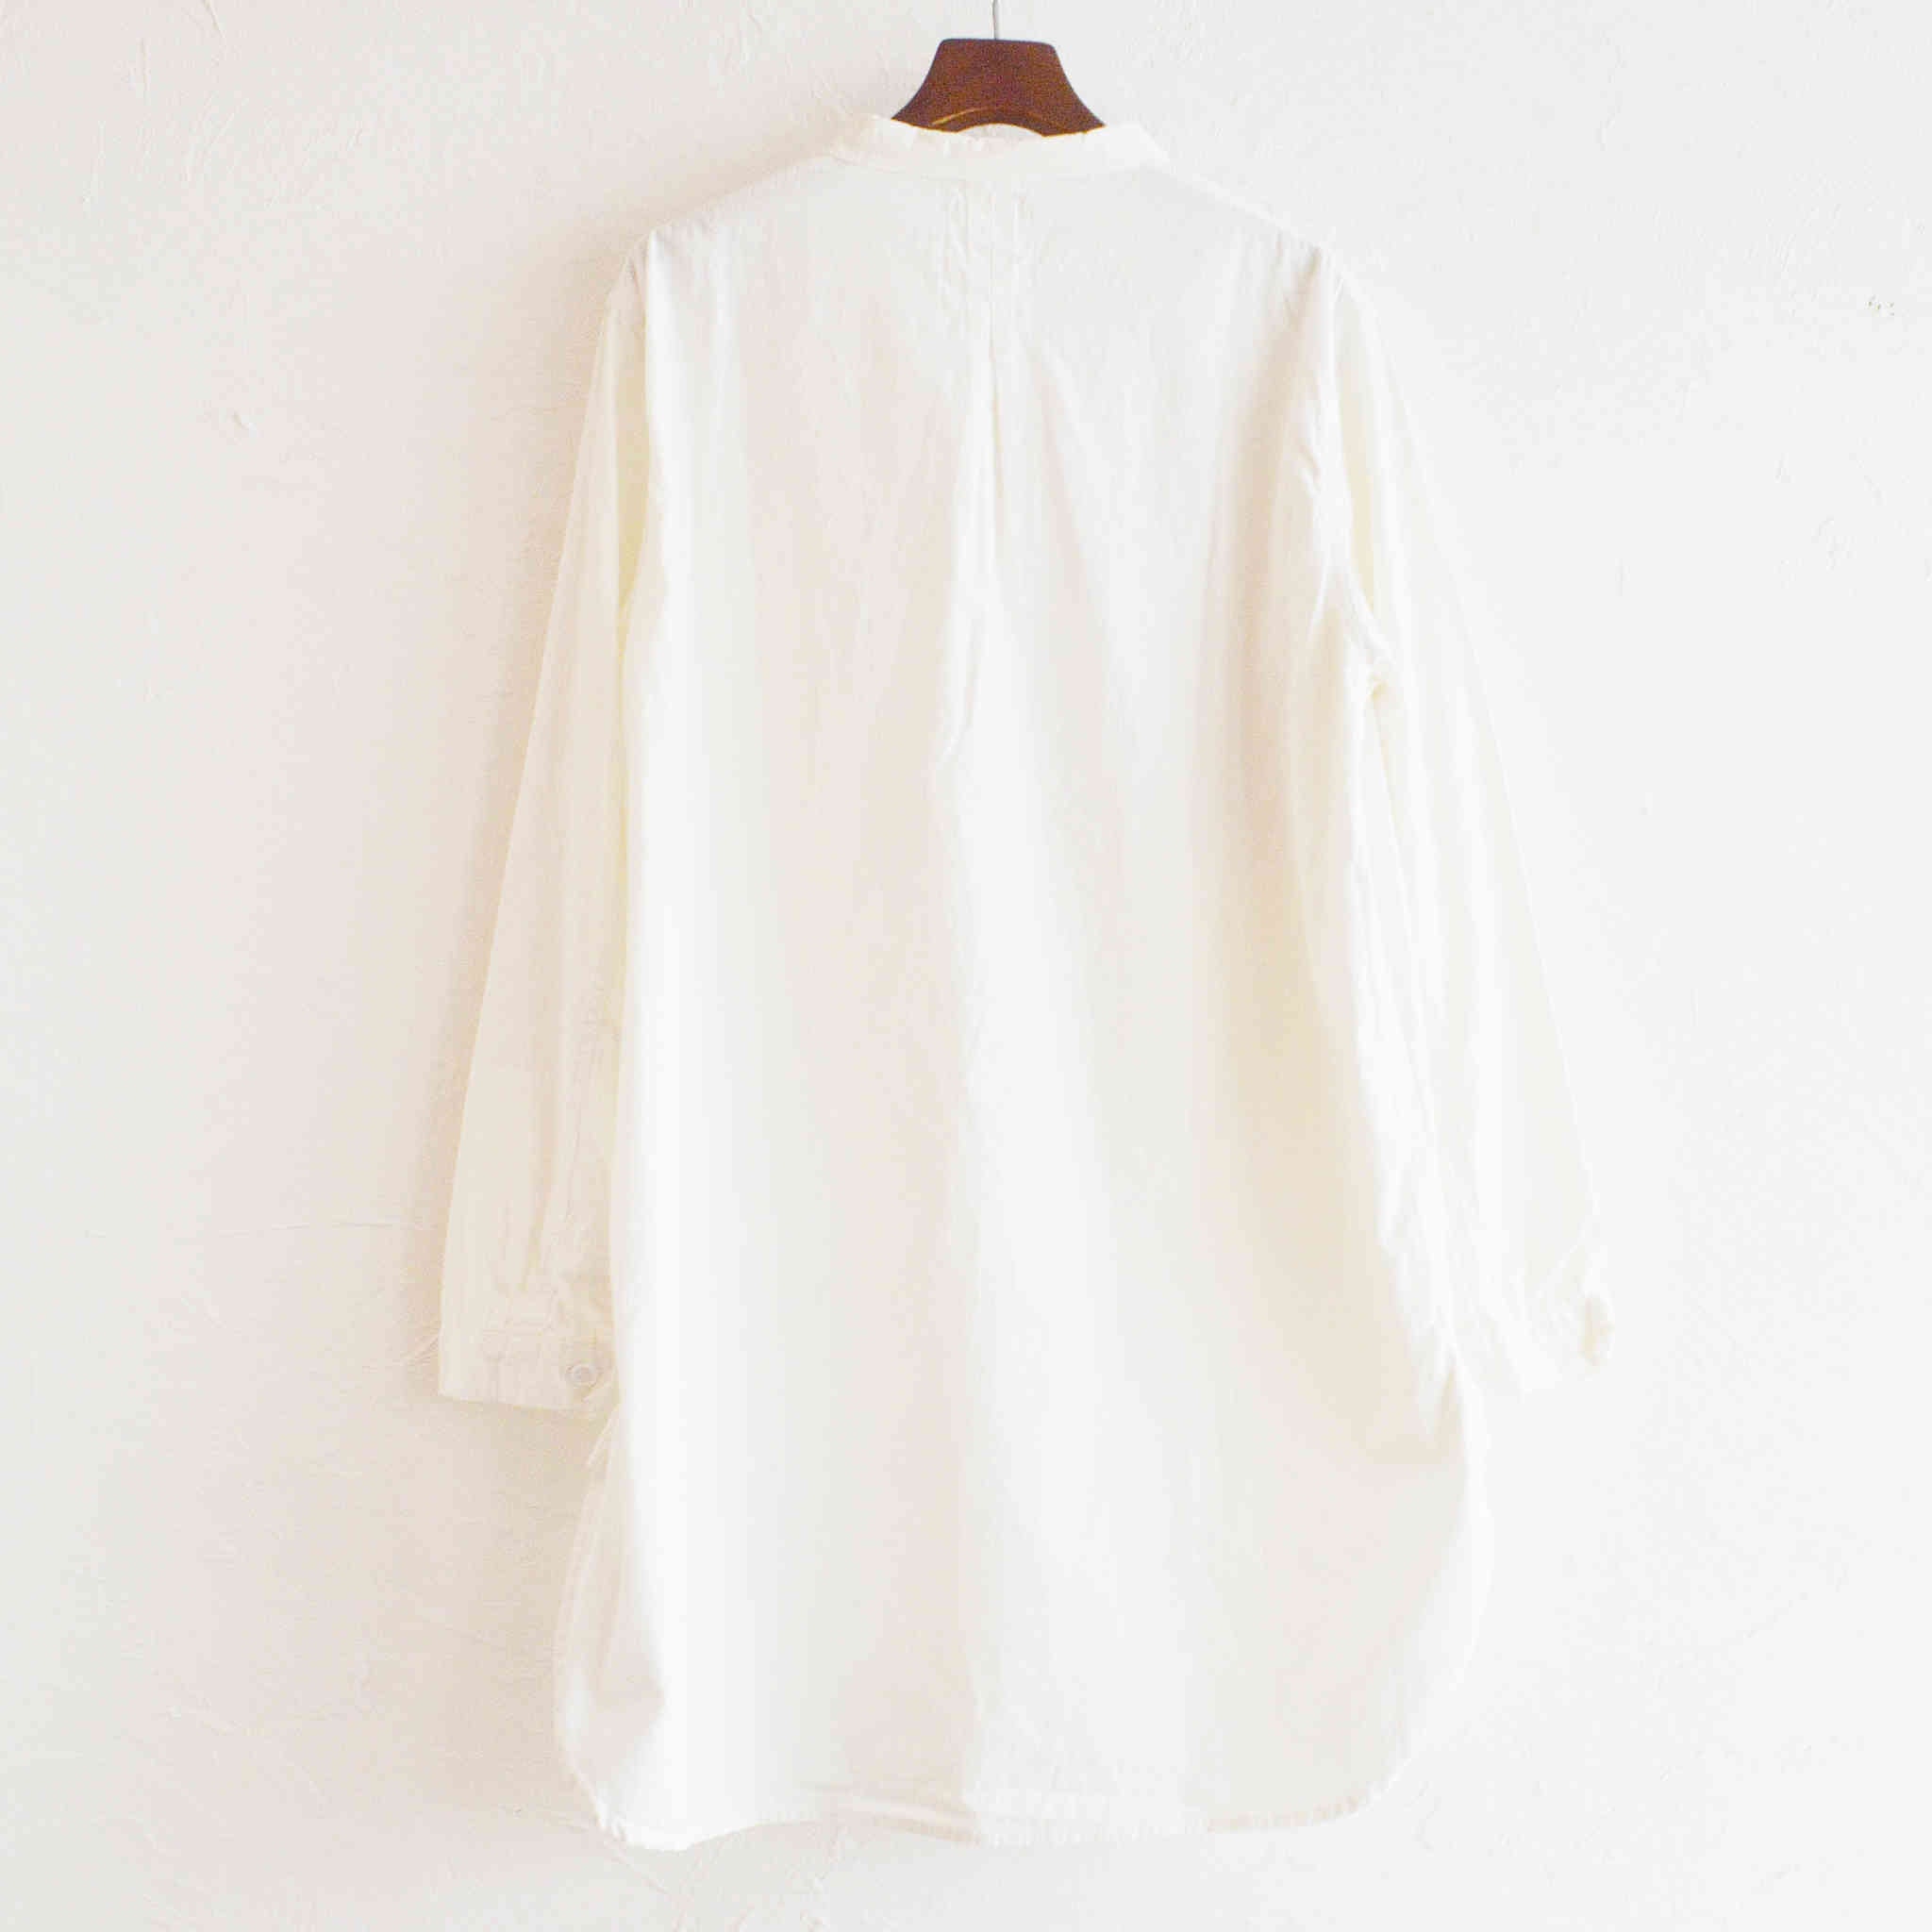 BIG P.PRODUCTS with ニコニコハウス / NICO PULLOVER SHIRTS (WHITE)